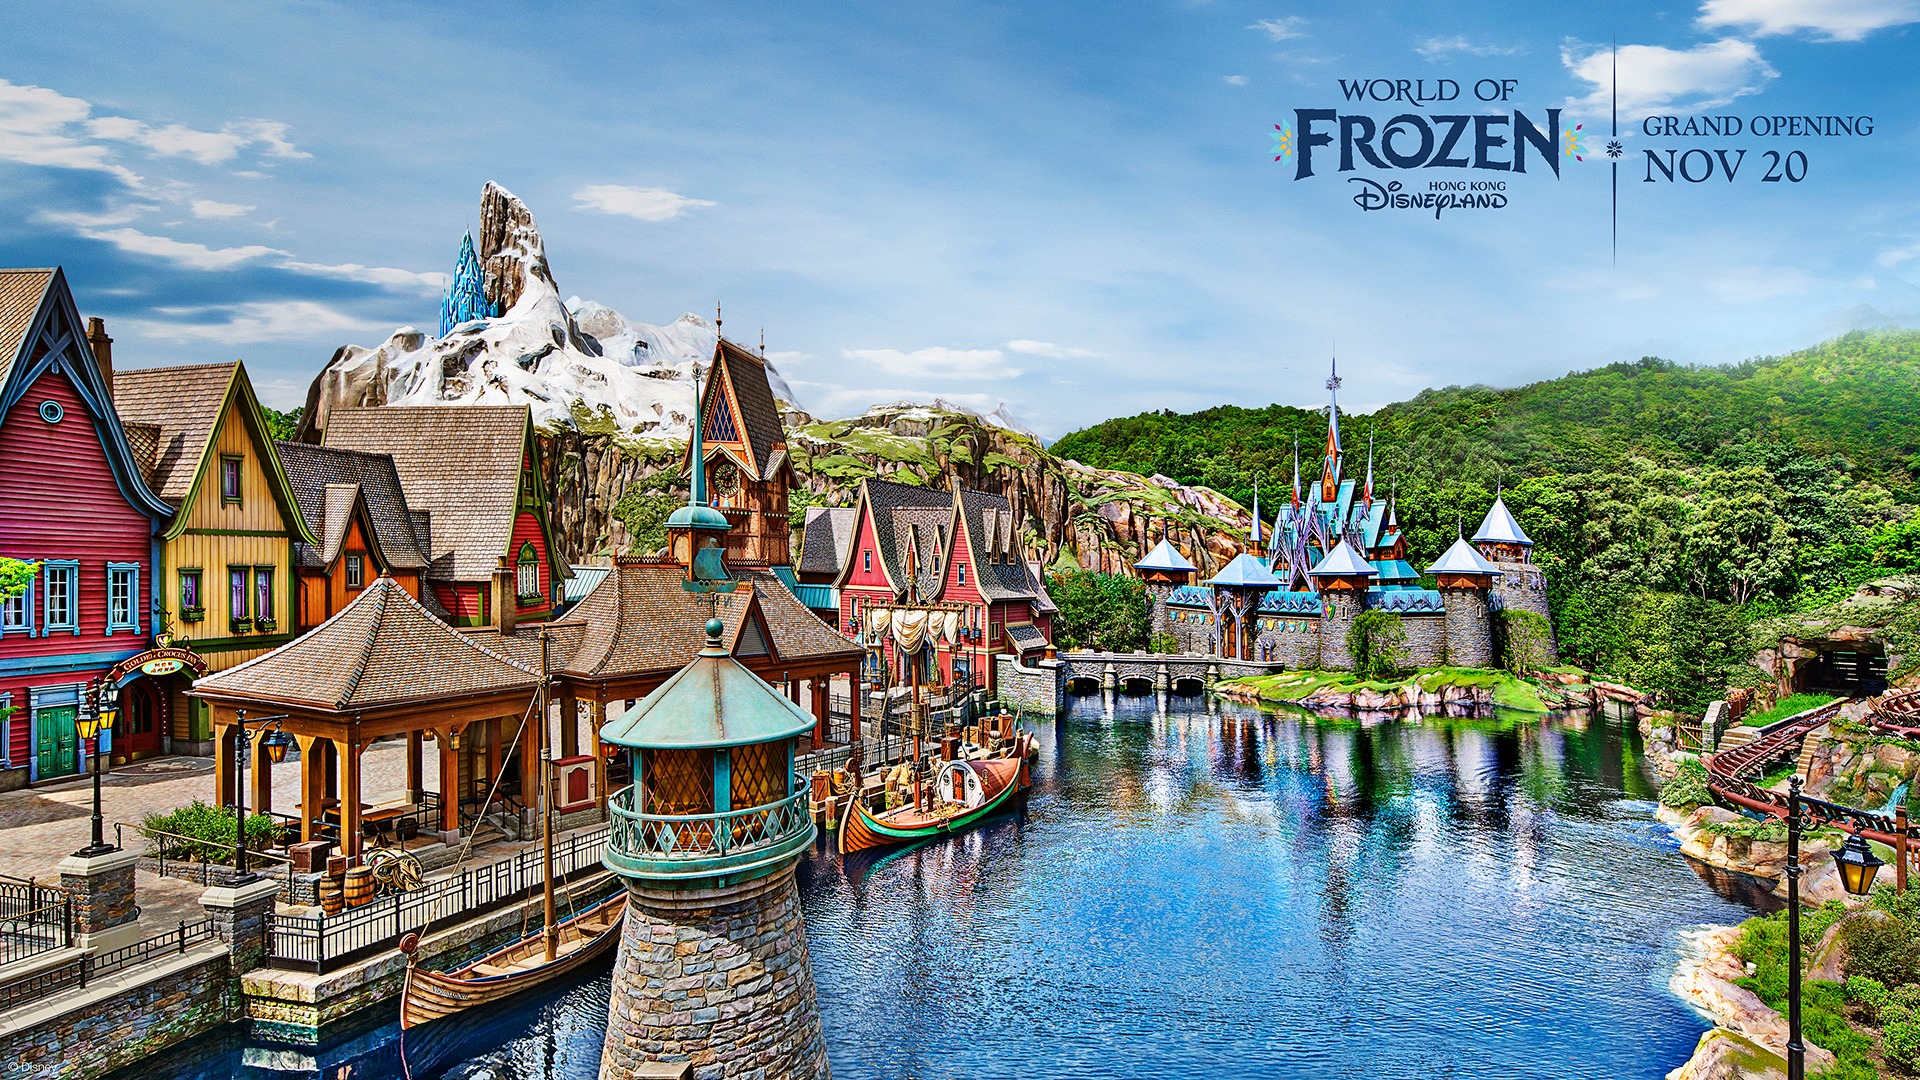 Hong Kong Disneyland Announces Opening Day for World of Frozen